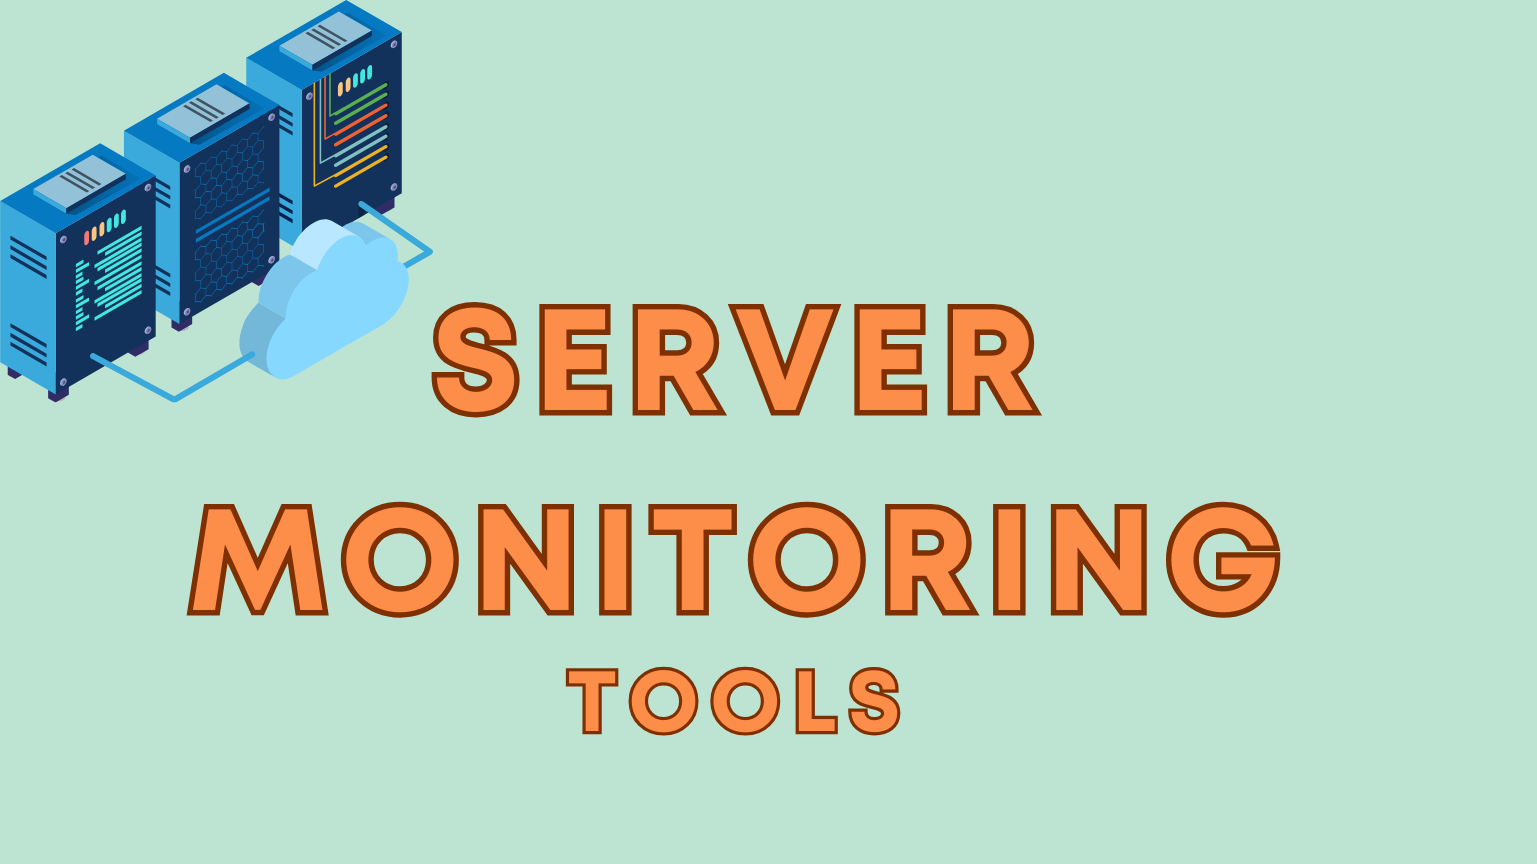 What-are-server-monitoring-tools?